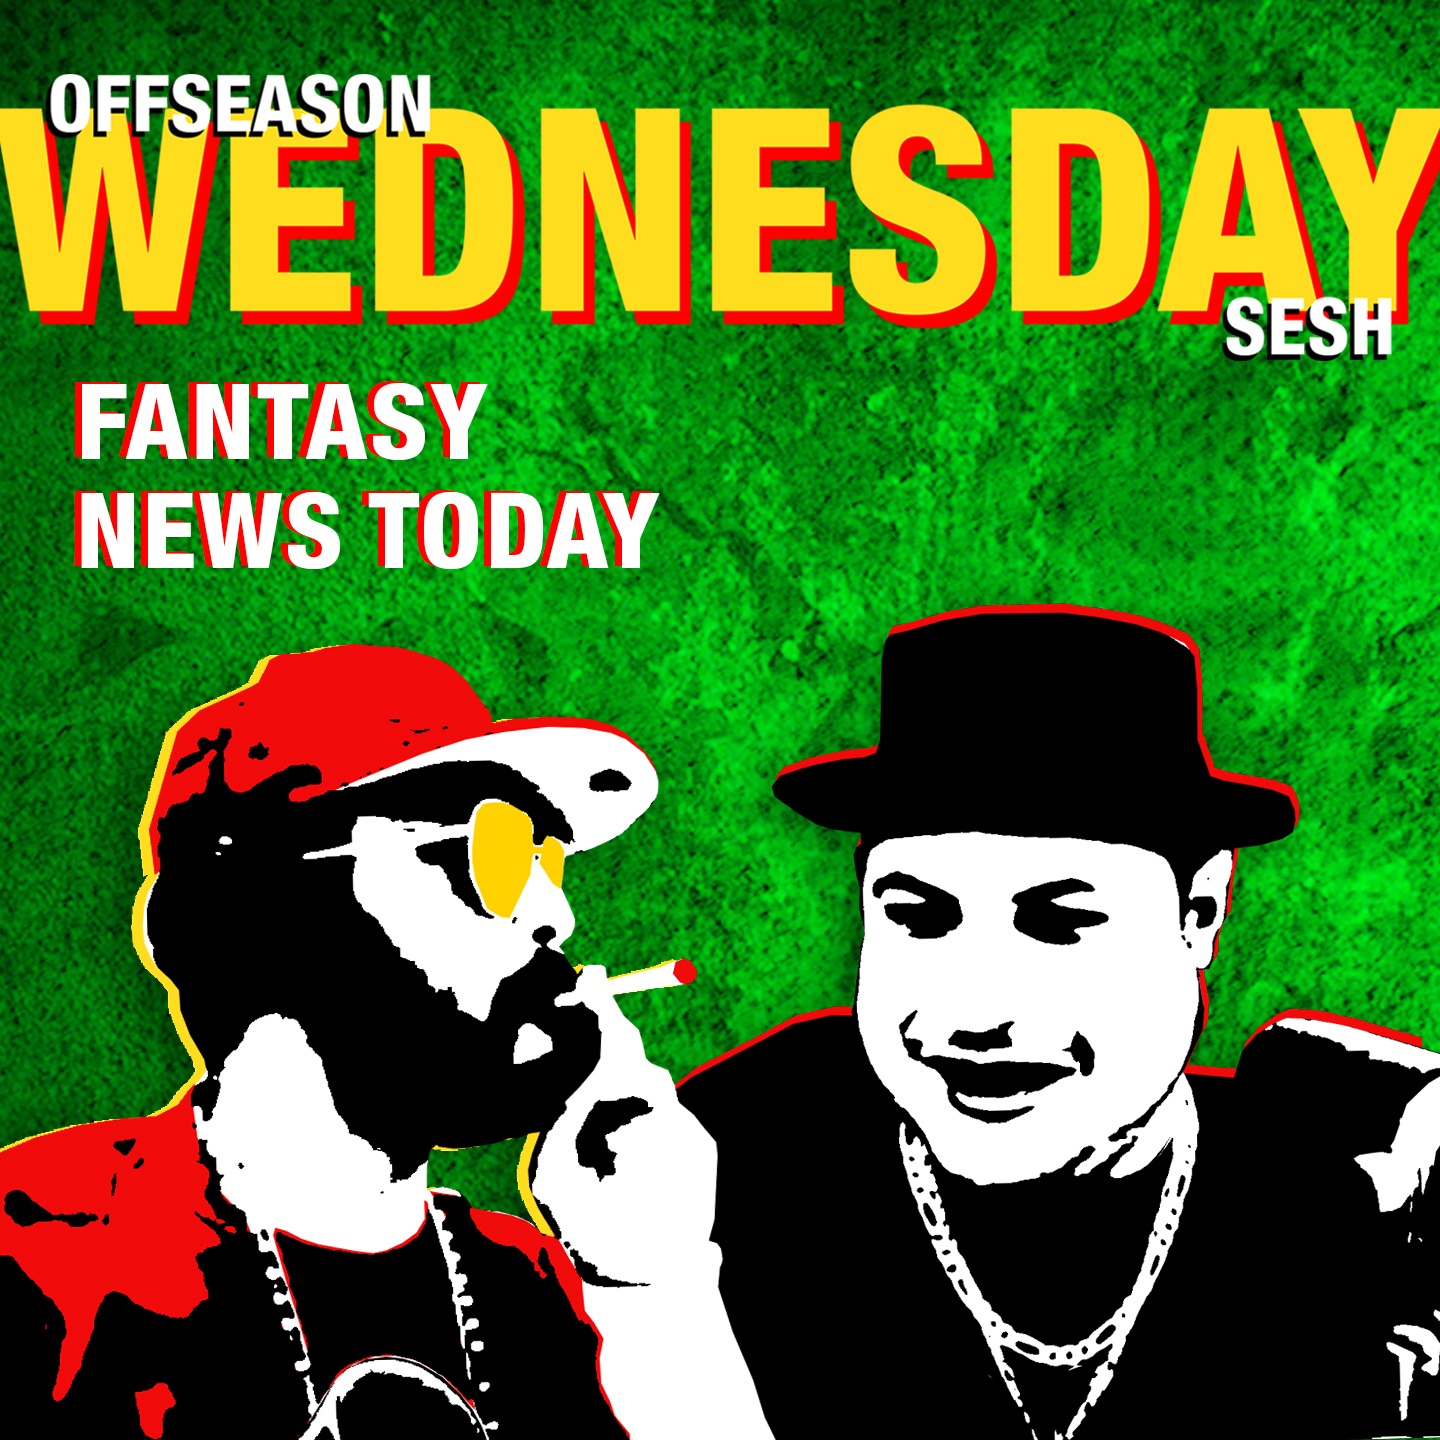 Fantasy Football News Today LIVE, Wednesday March 2nd Image